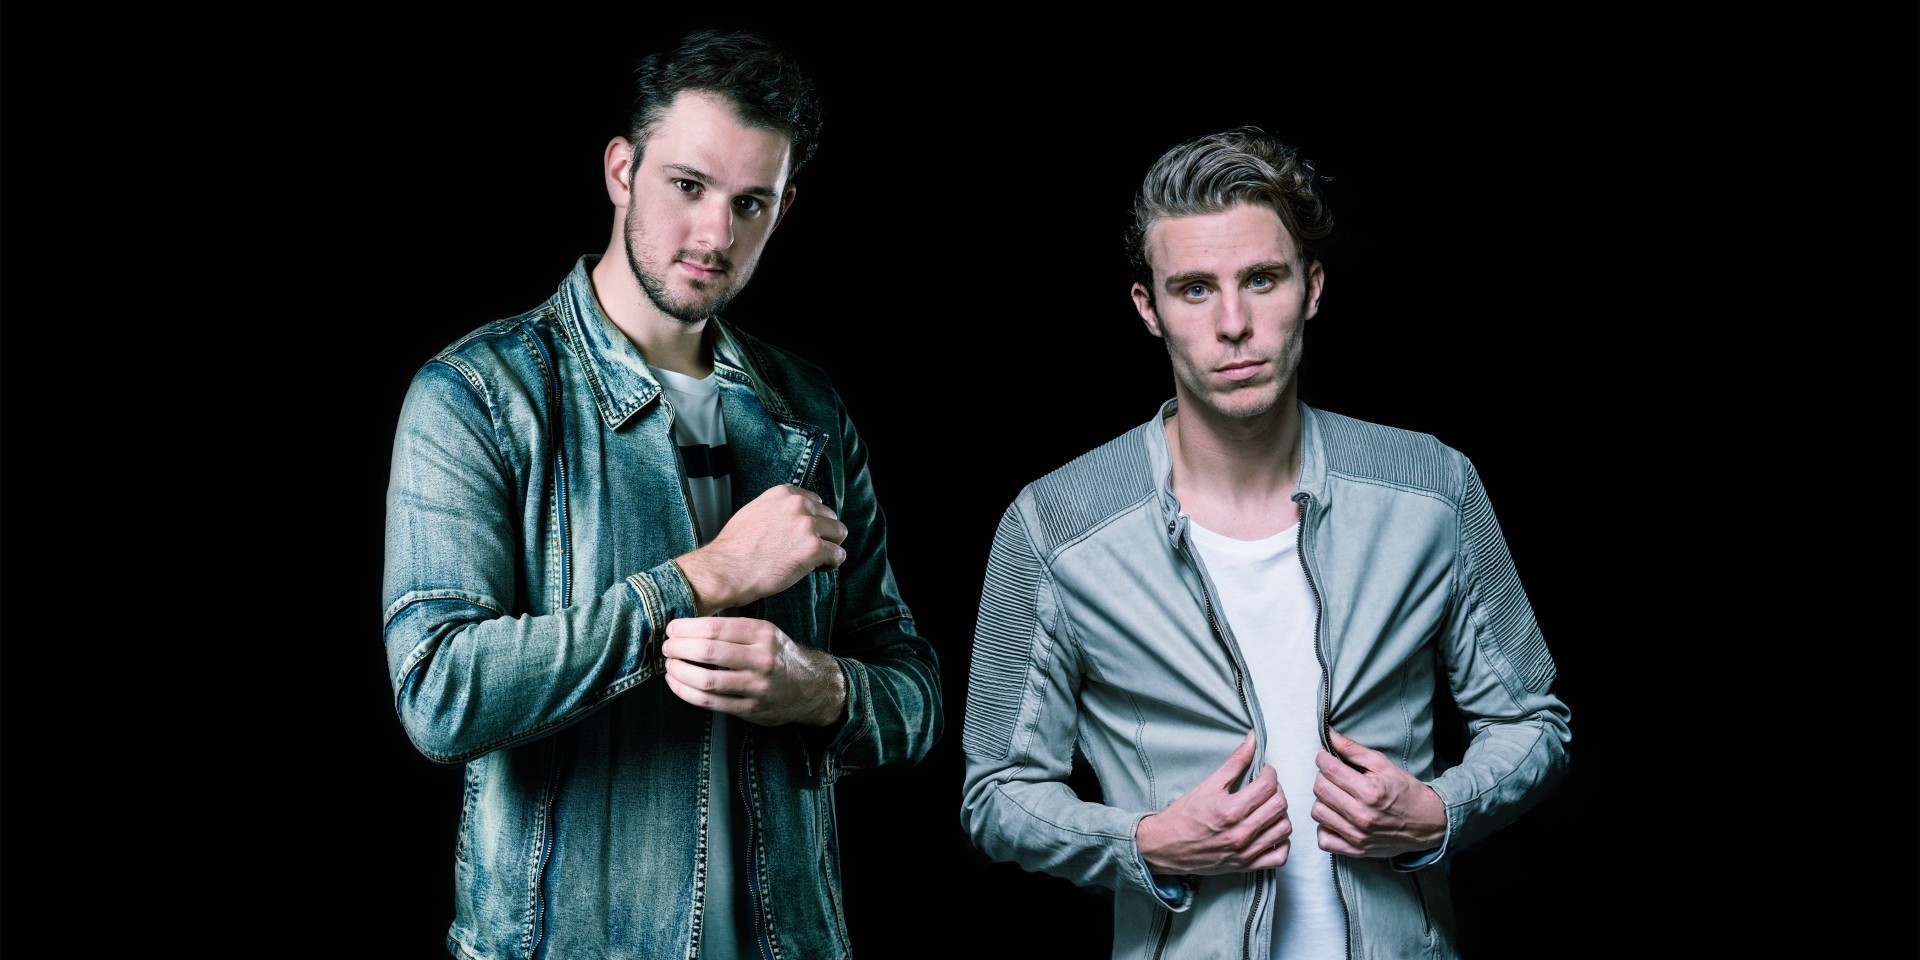 "Dance music is in a great place ": W&W reflects on the potential of the present scene ahead of its ZoukOut 2018 set